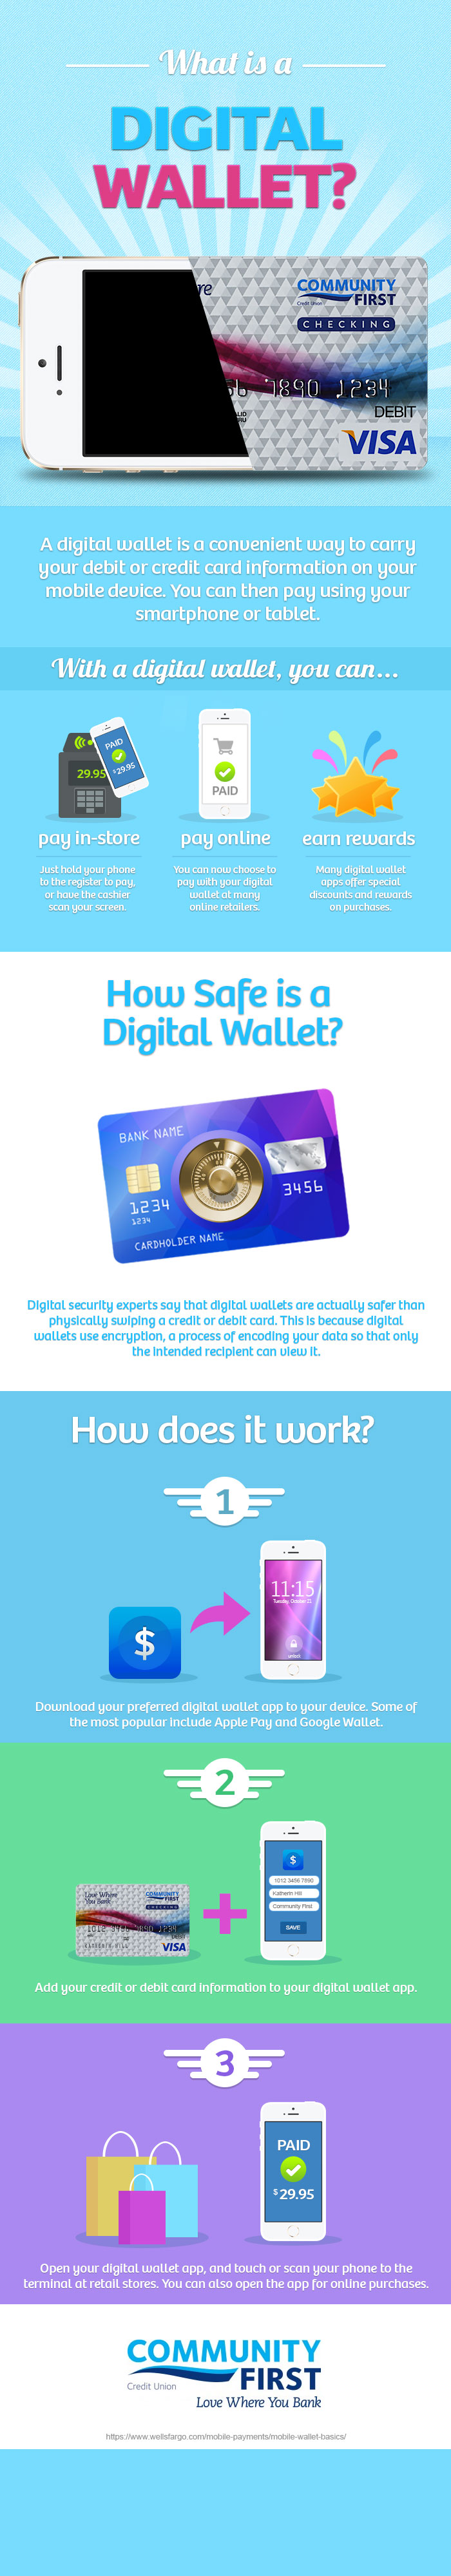 What is a Digital Wallet?